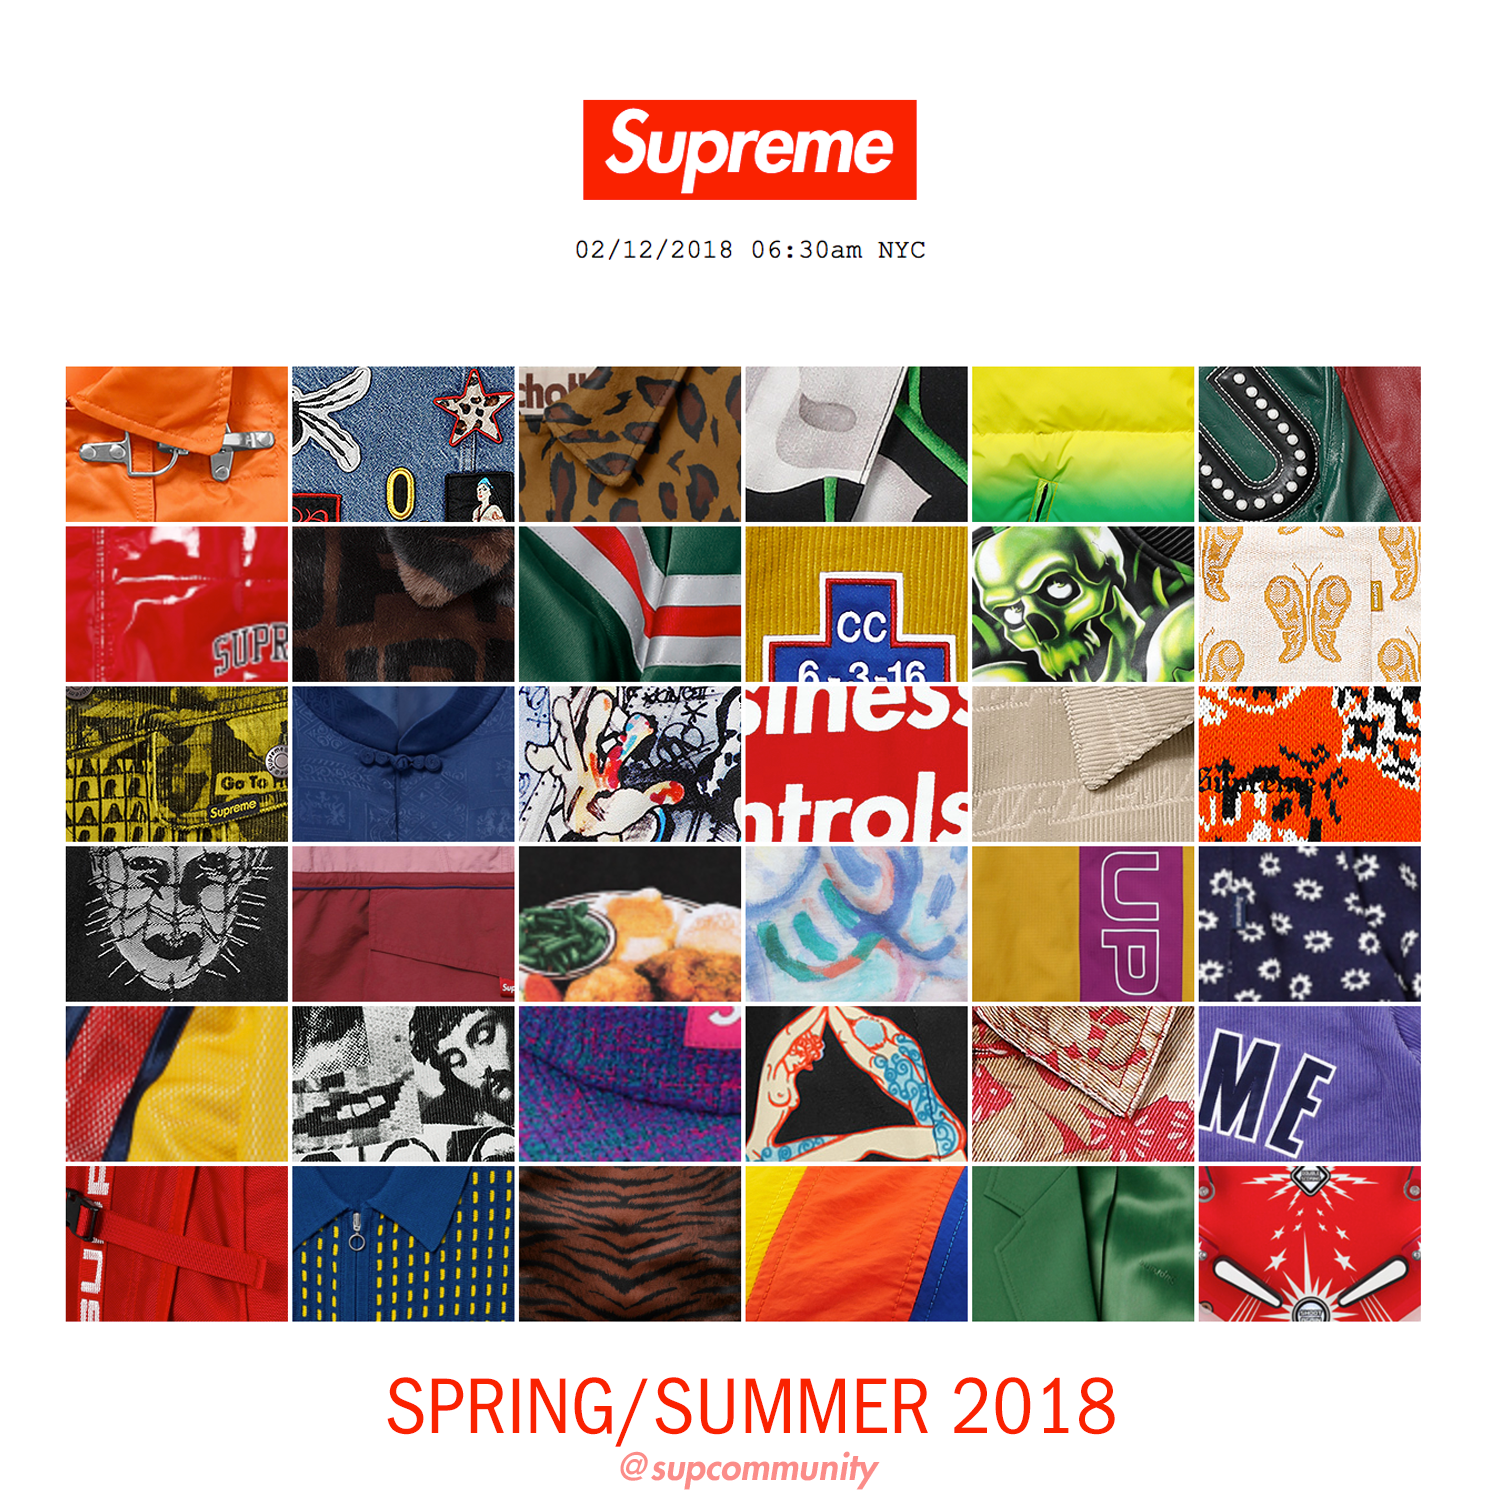 Spring/Summer 2018 Preview News - Supreme Community